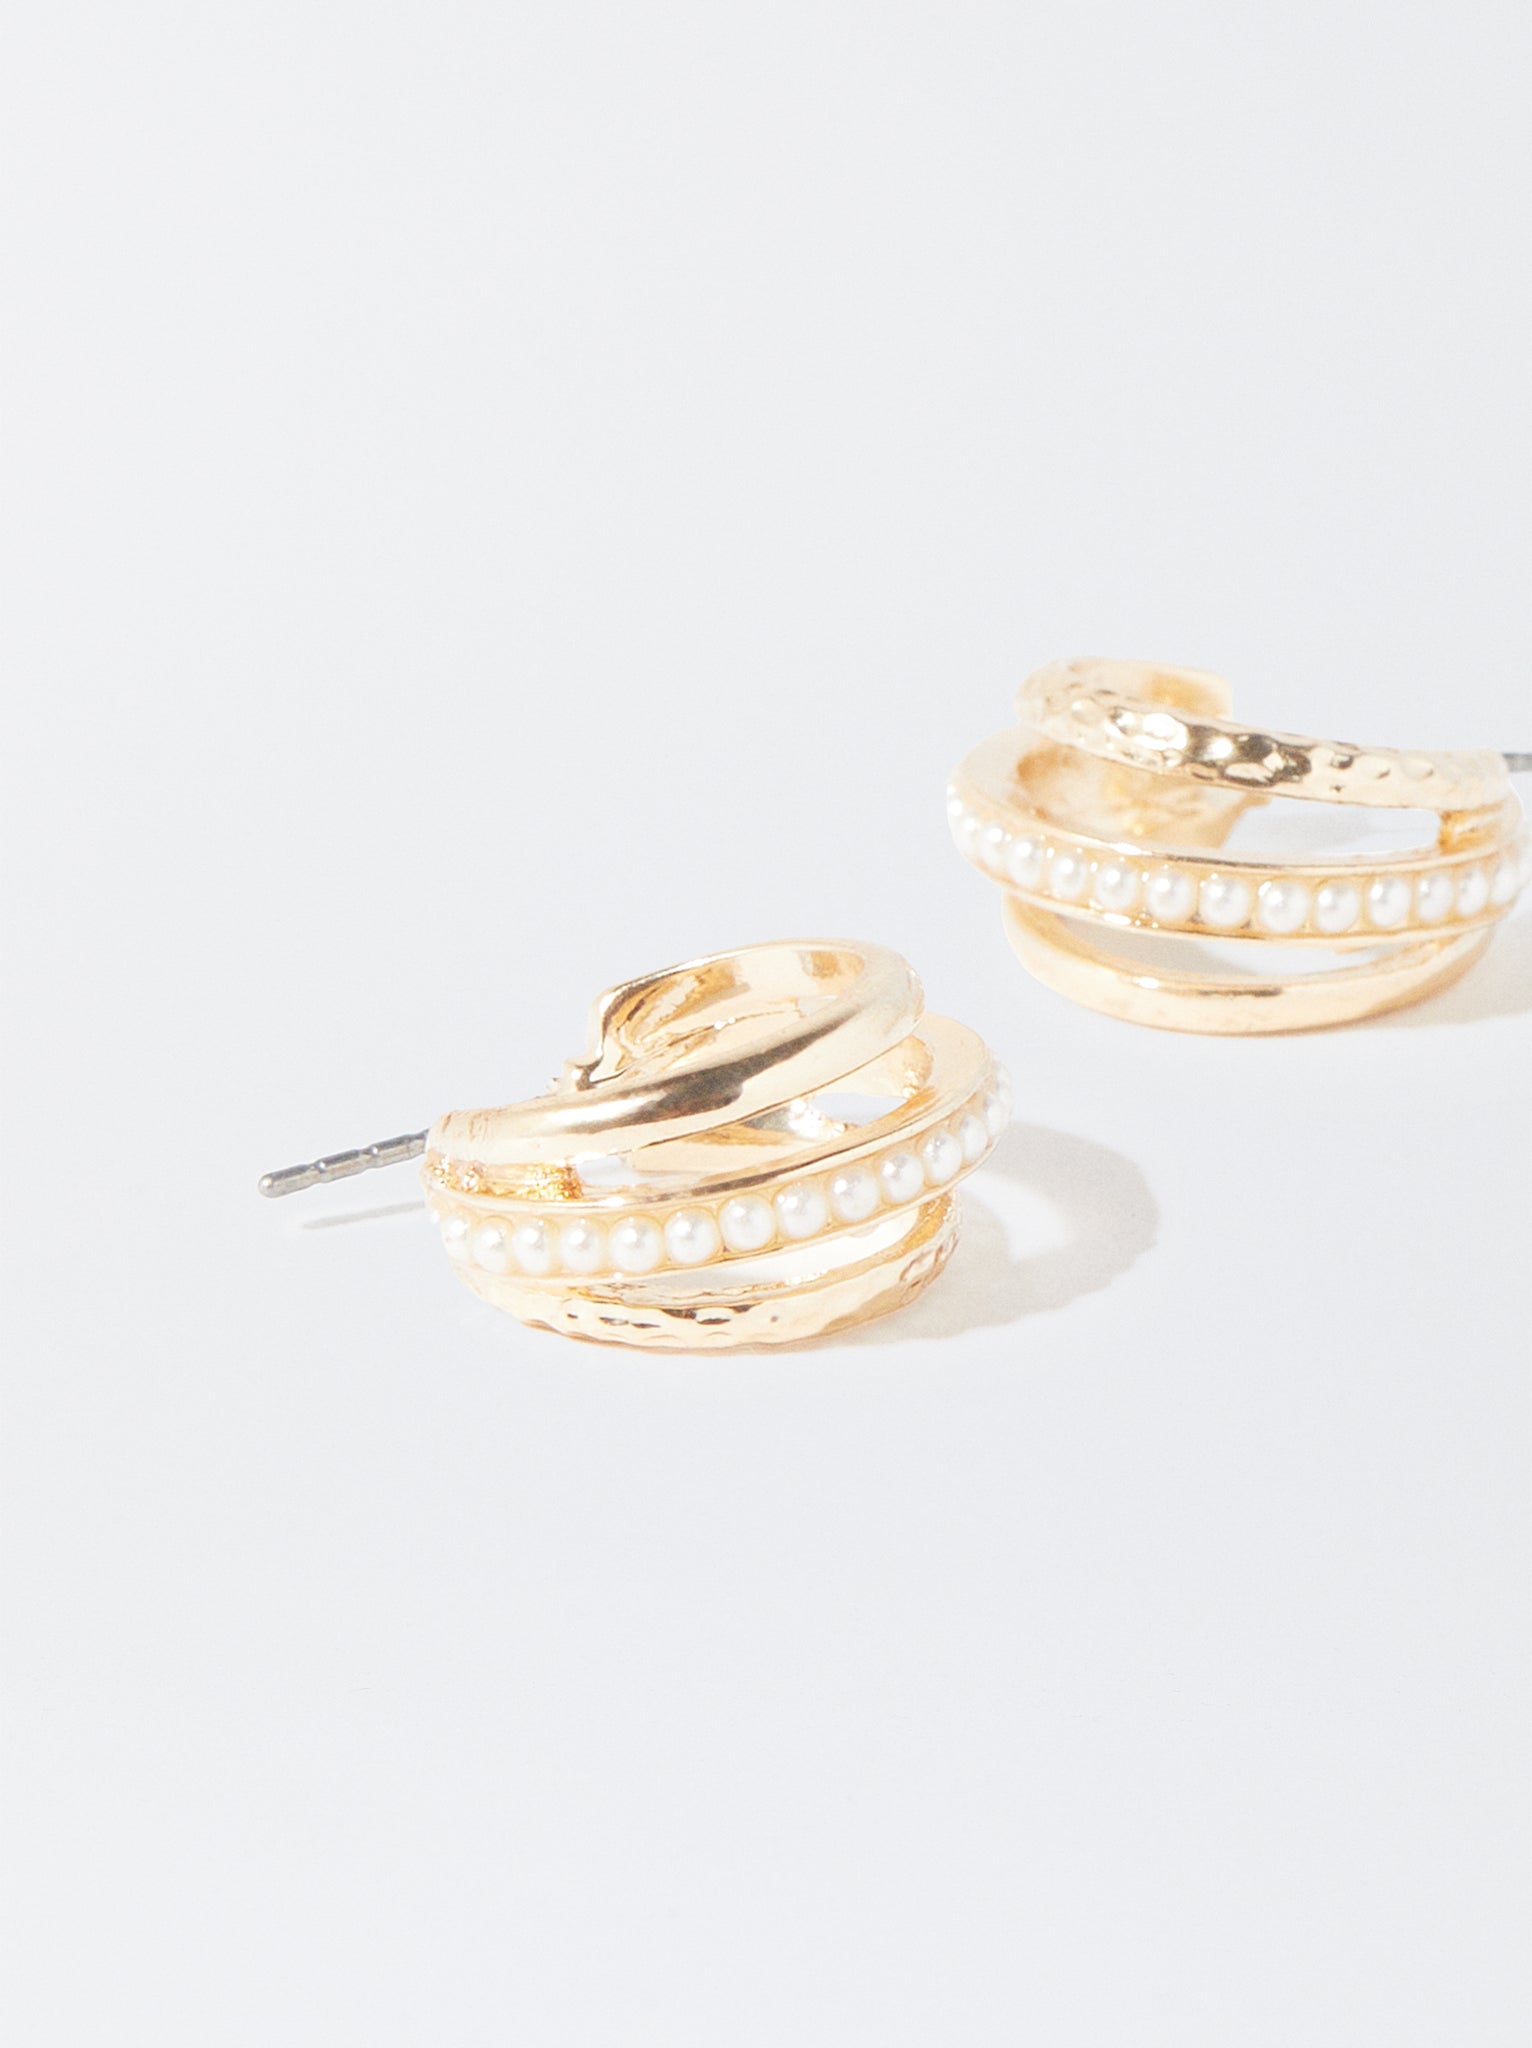 Gold-Toned Hoop Earrings With Faux Pearls